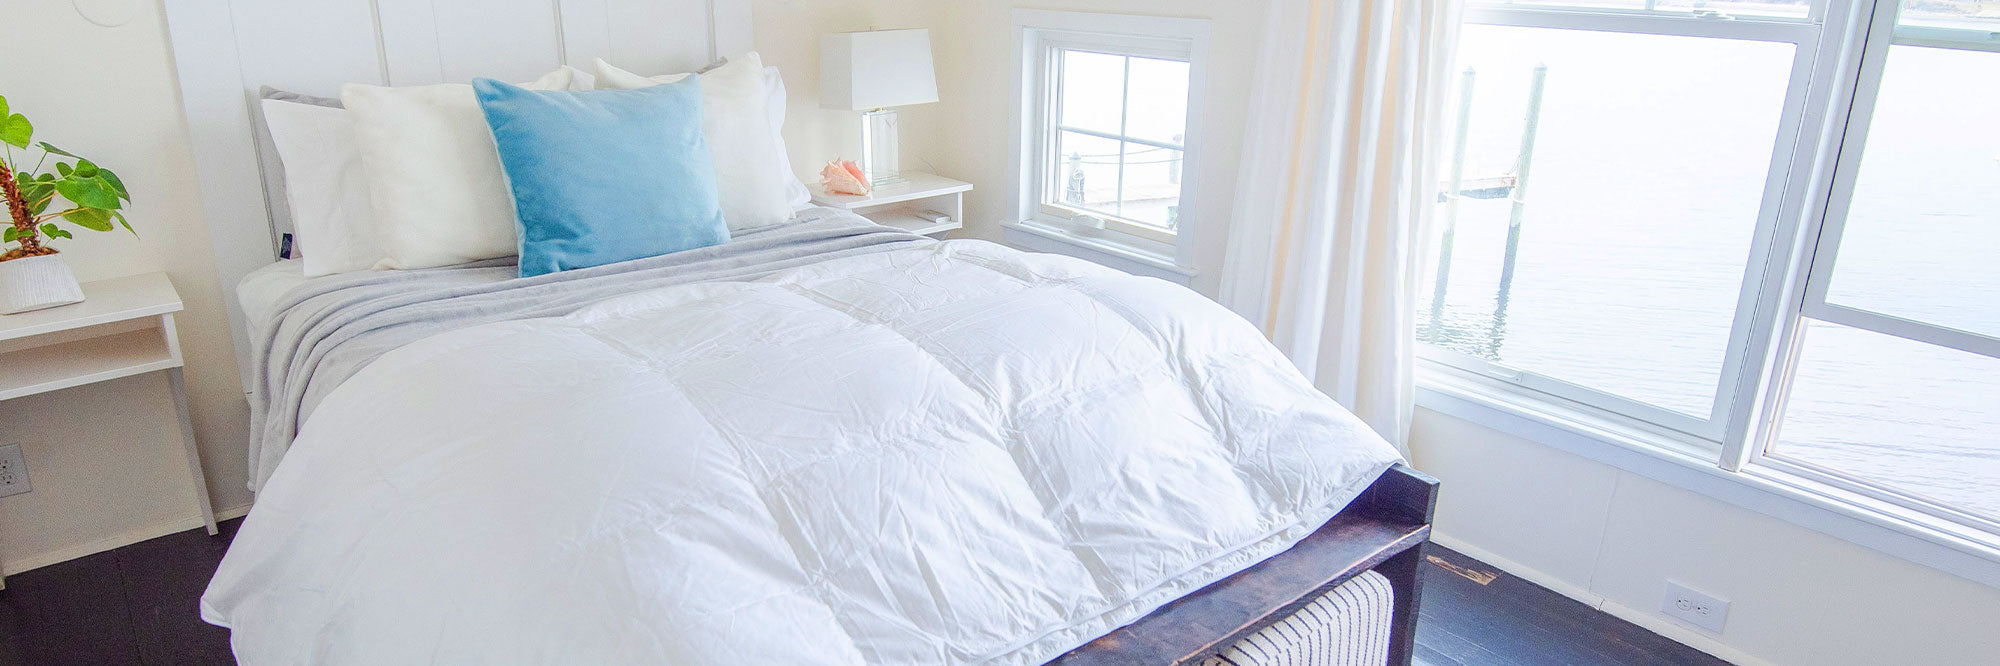 Polyester Comforters vs. Down Comforters: Battle of the Warmth